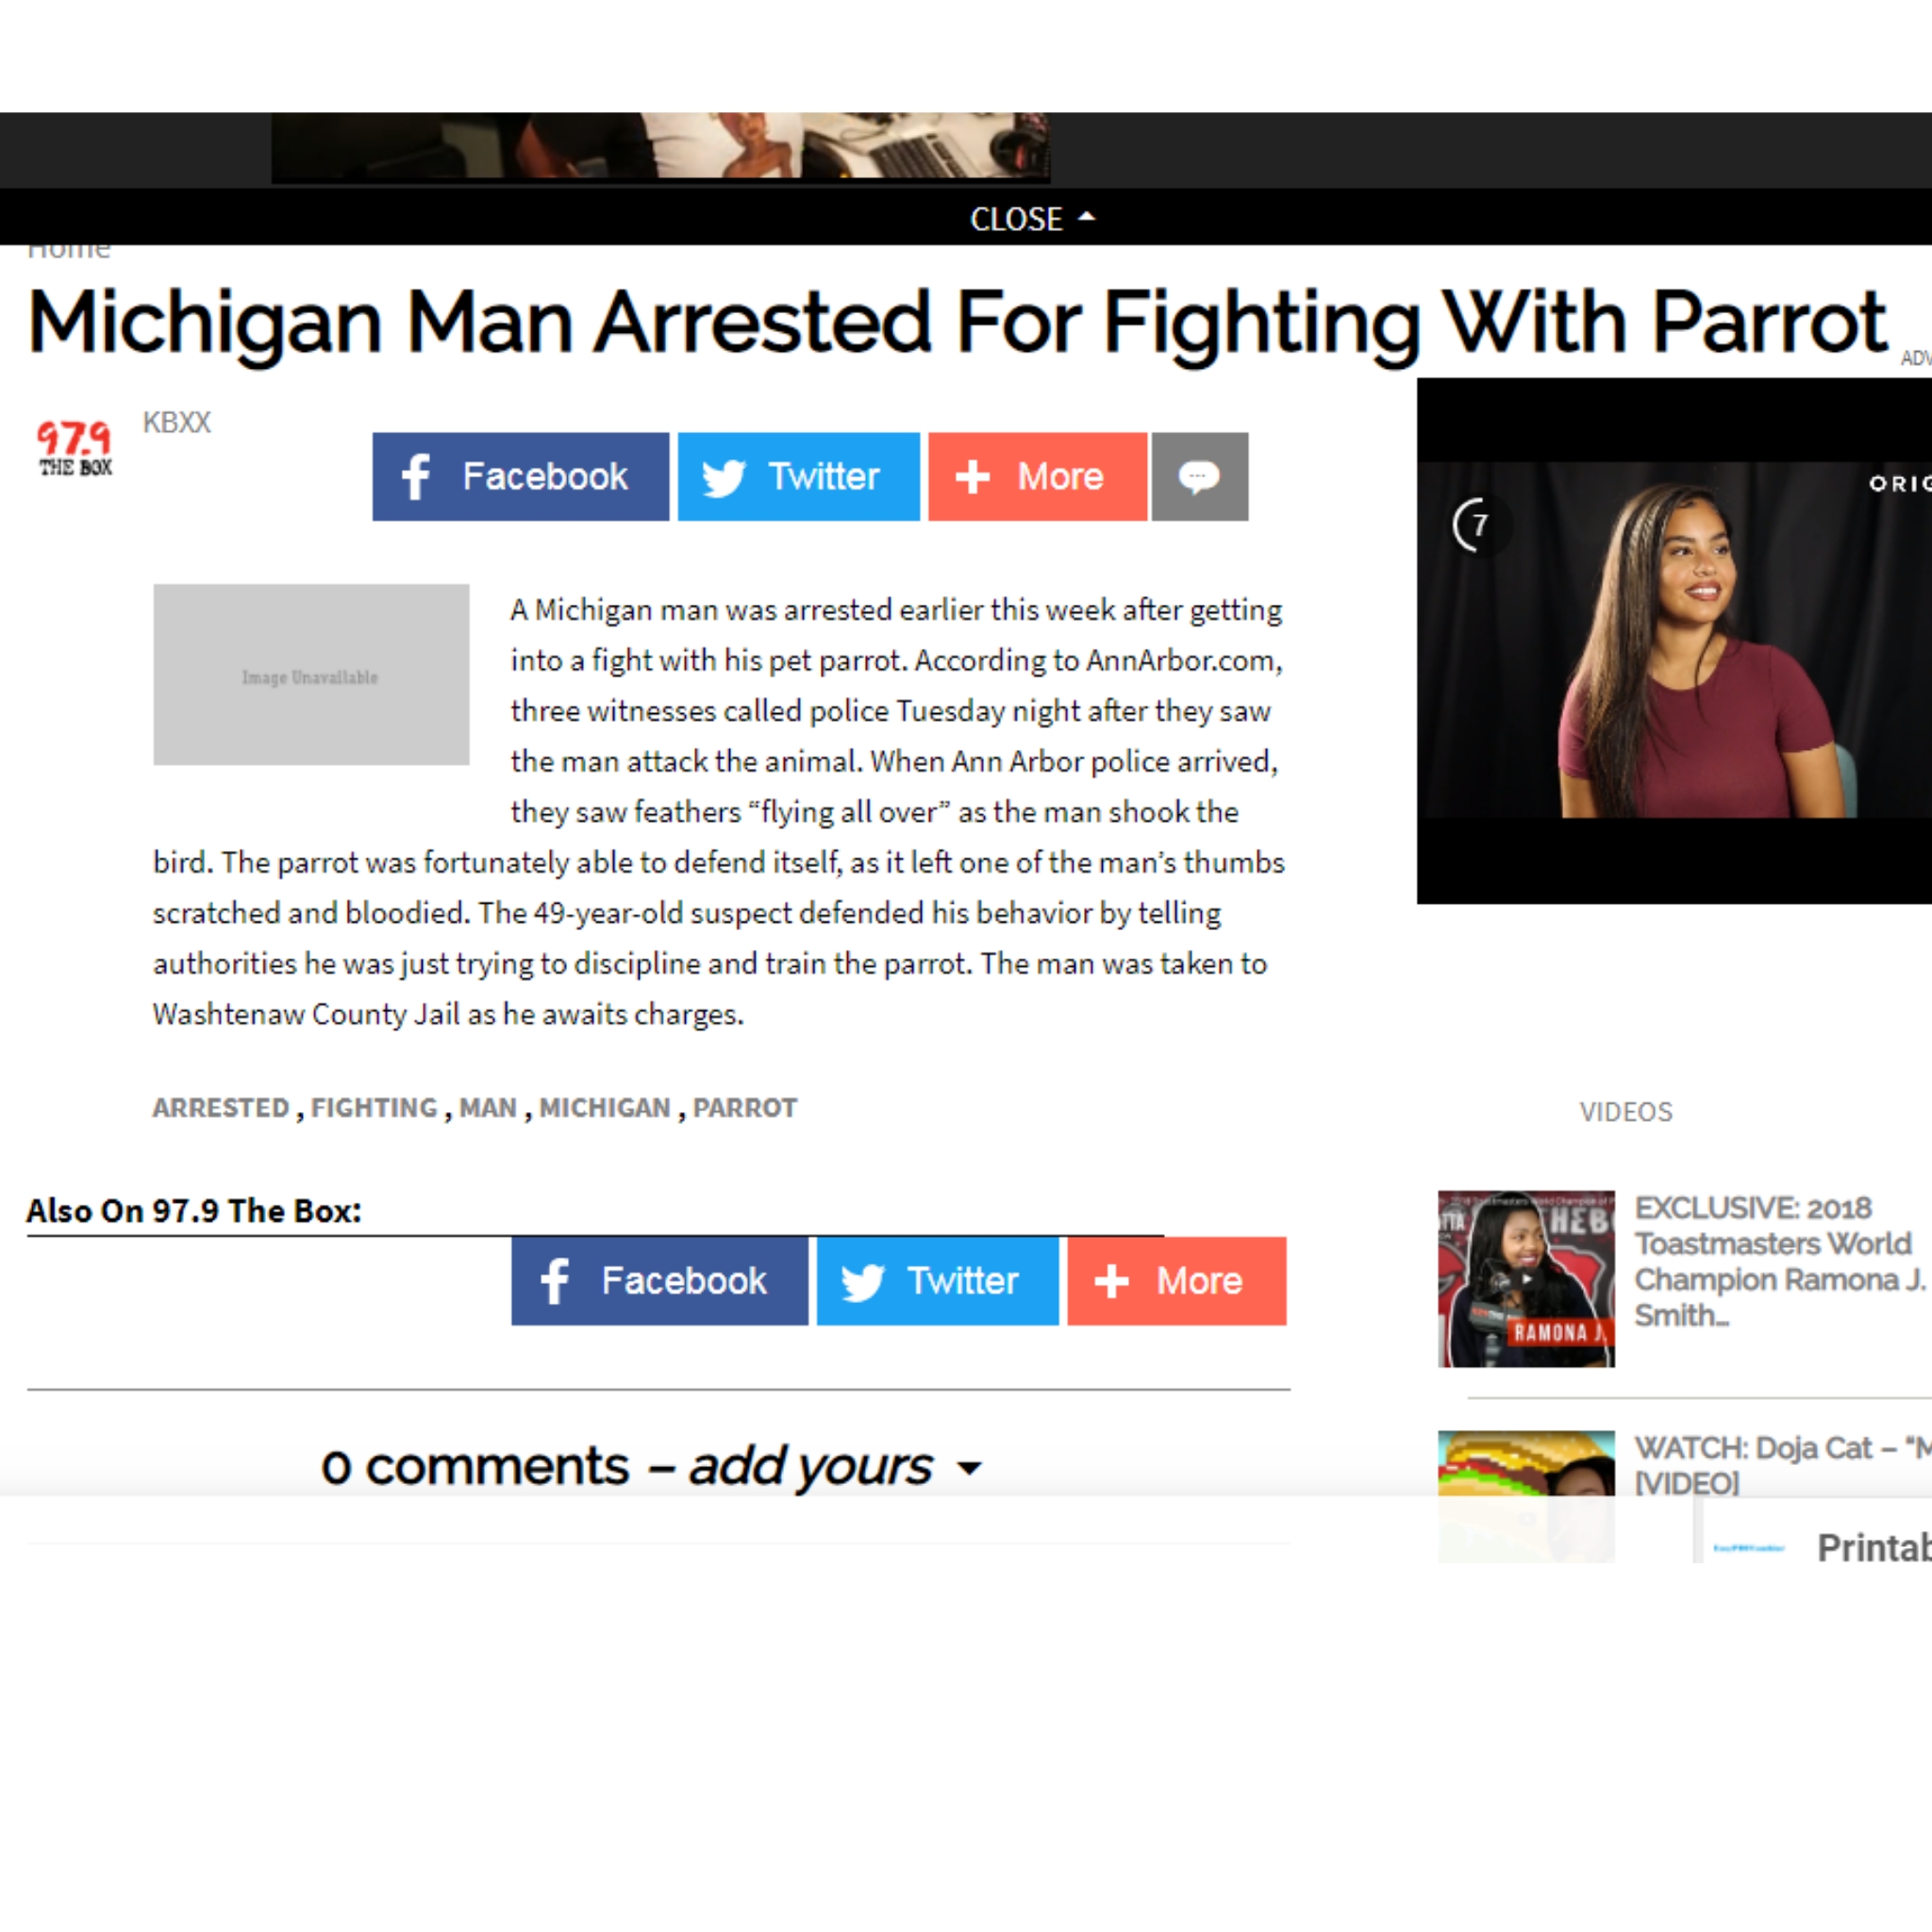 web page - Close Michigan Man Arrested For Fighting With Parrot f Facebook y Twitter More into a fight with his pet parrot. According to Ann Arbot.com three witnesses called police Tuesday night after they saw the man attack the animal. When Ann Arbor pol